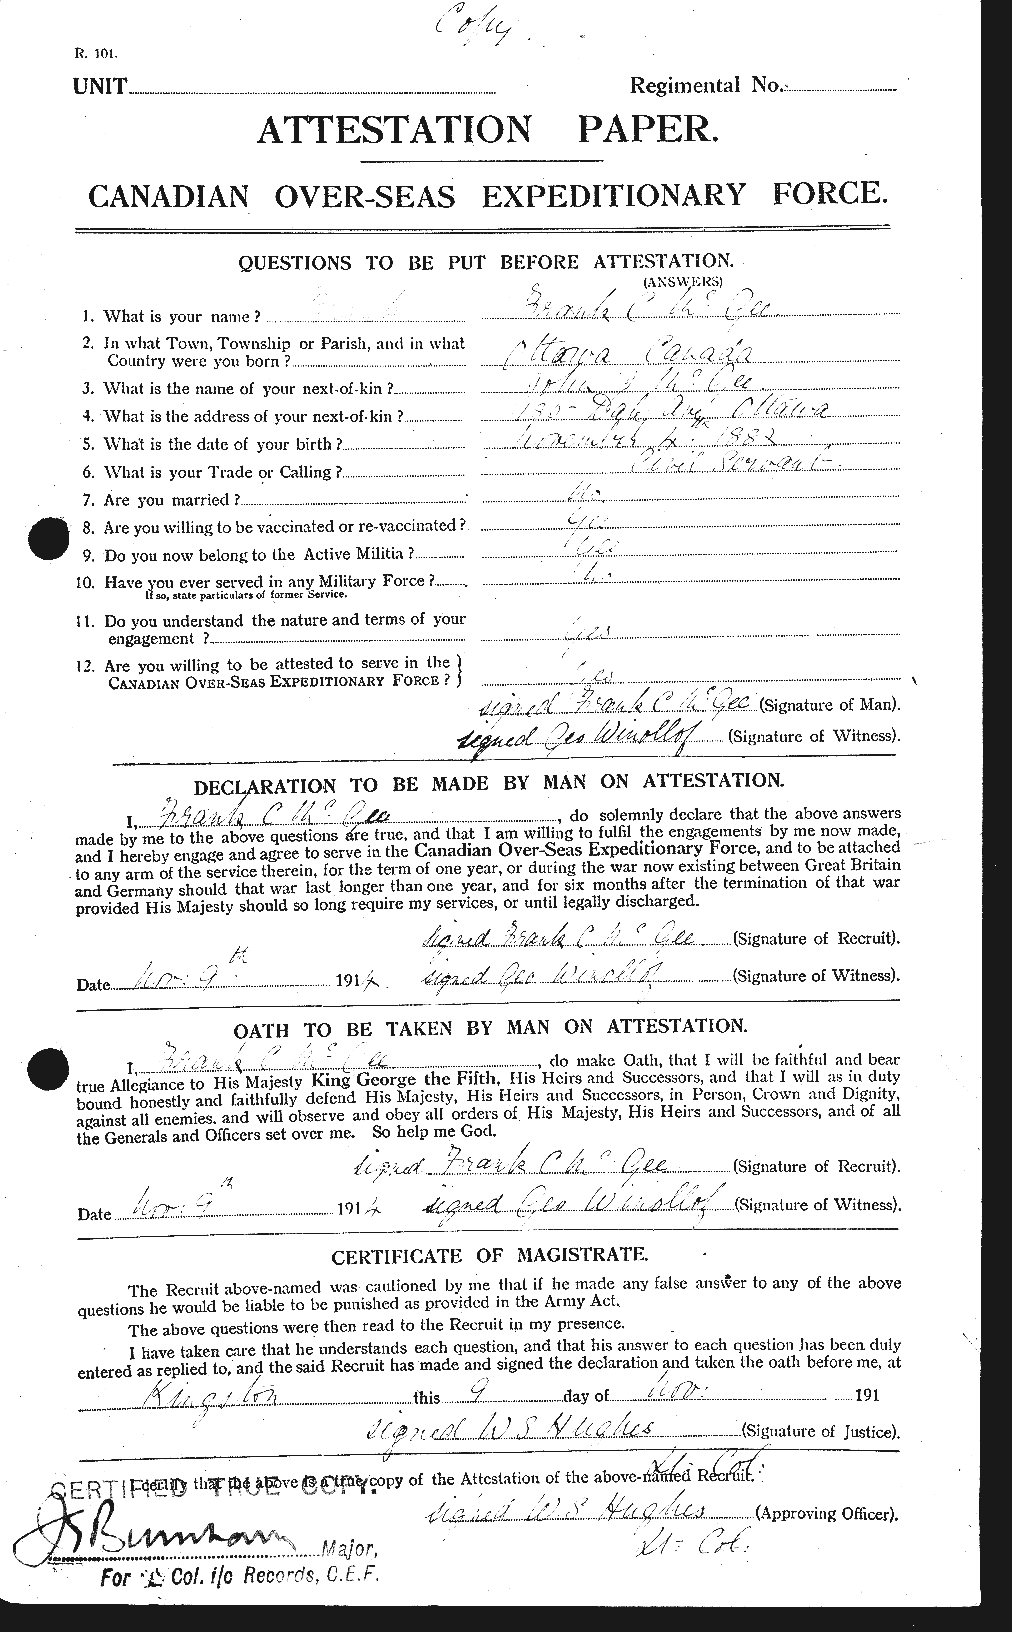 Attestation record: Francis Clarence McGee